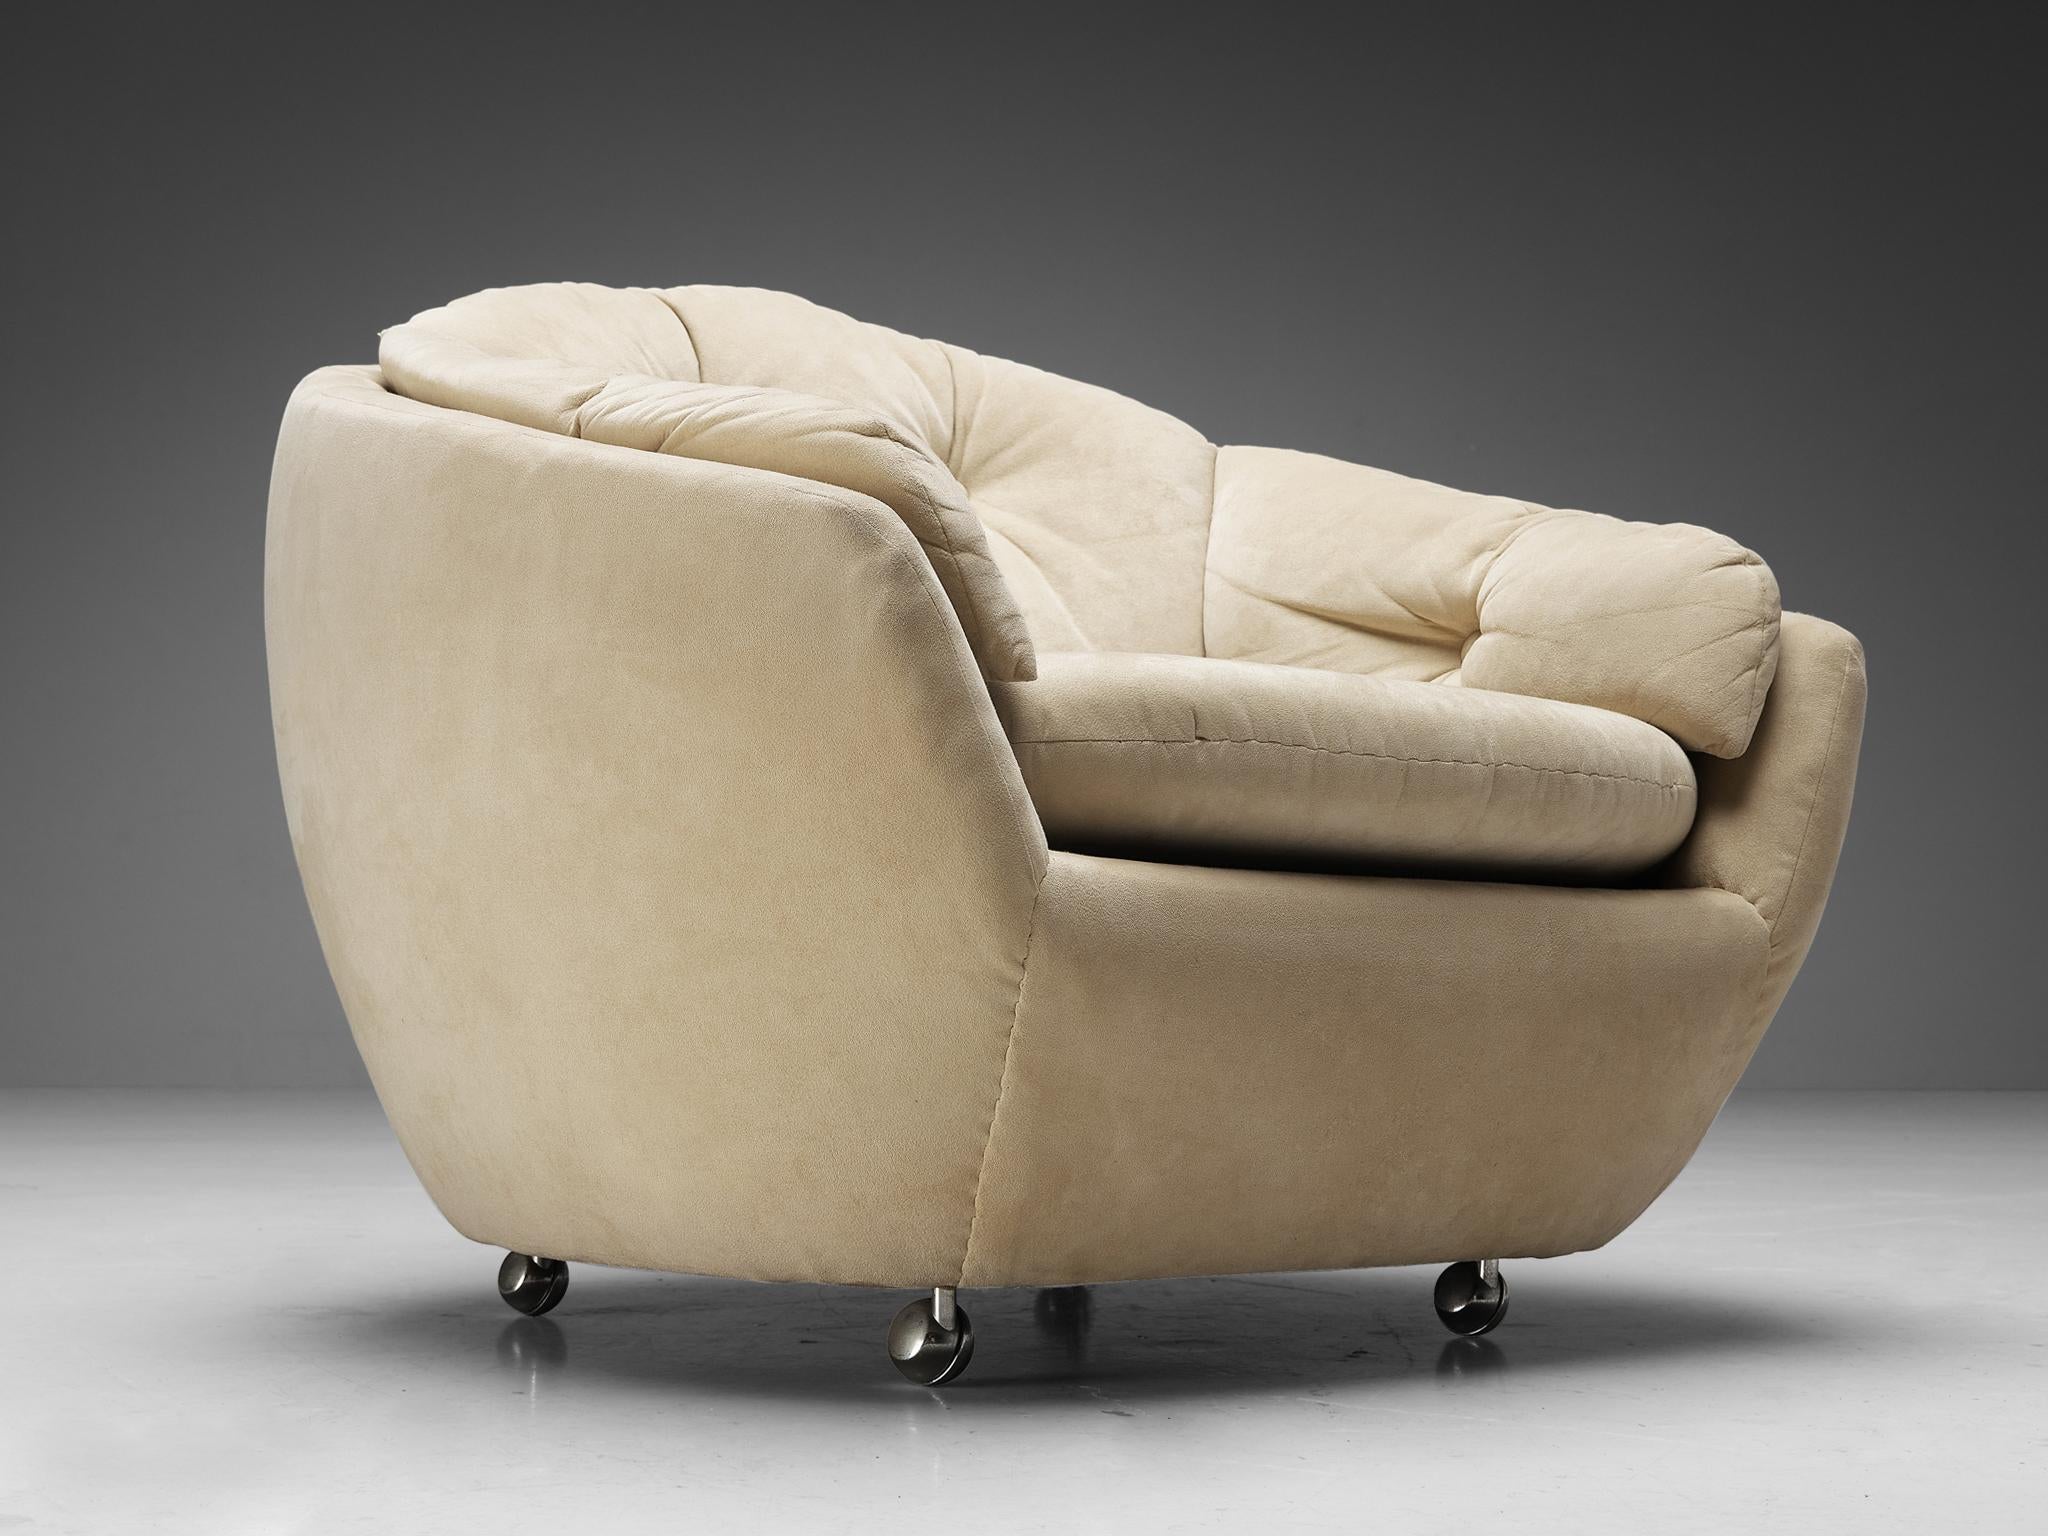 Knoll Antimott, lounge chairs, alcantara, chrome, Germany, 1960s

Somewhere between 1925-1929 Wilhelm Knoll developed a patented system of seating named 'Antimott'. The line consisted of furniture that was moth-resistance, hence the name. This easy